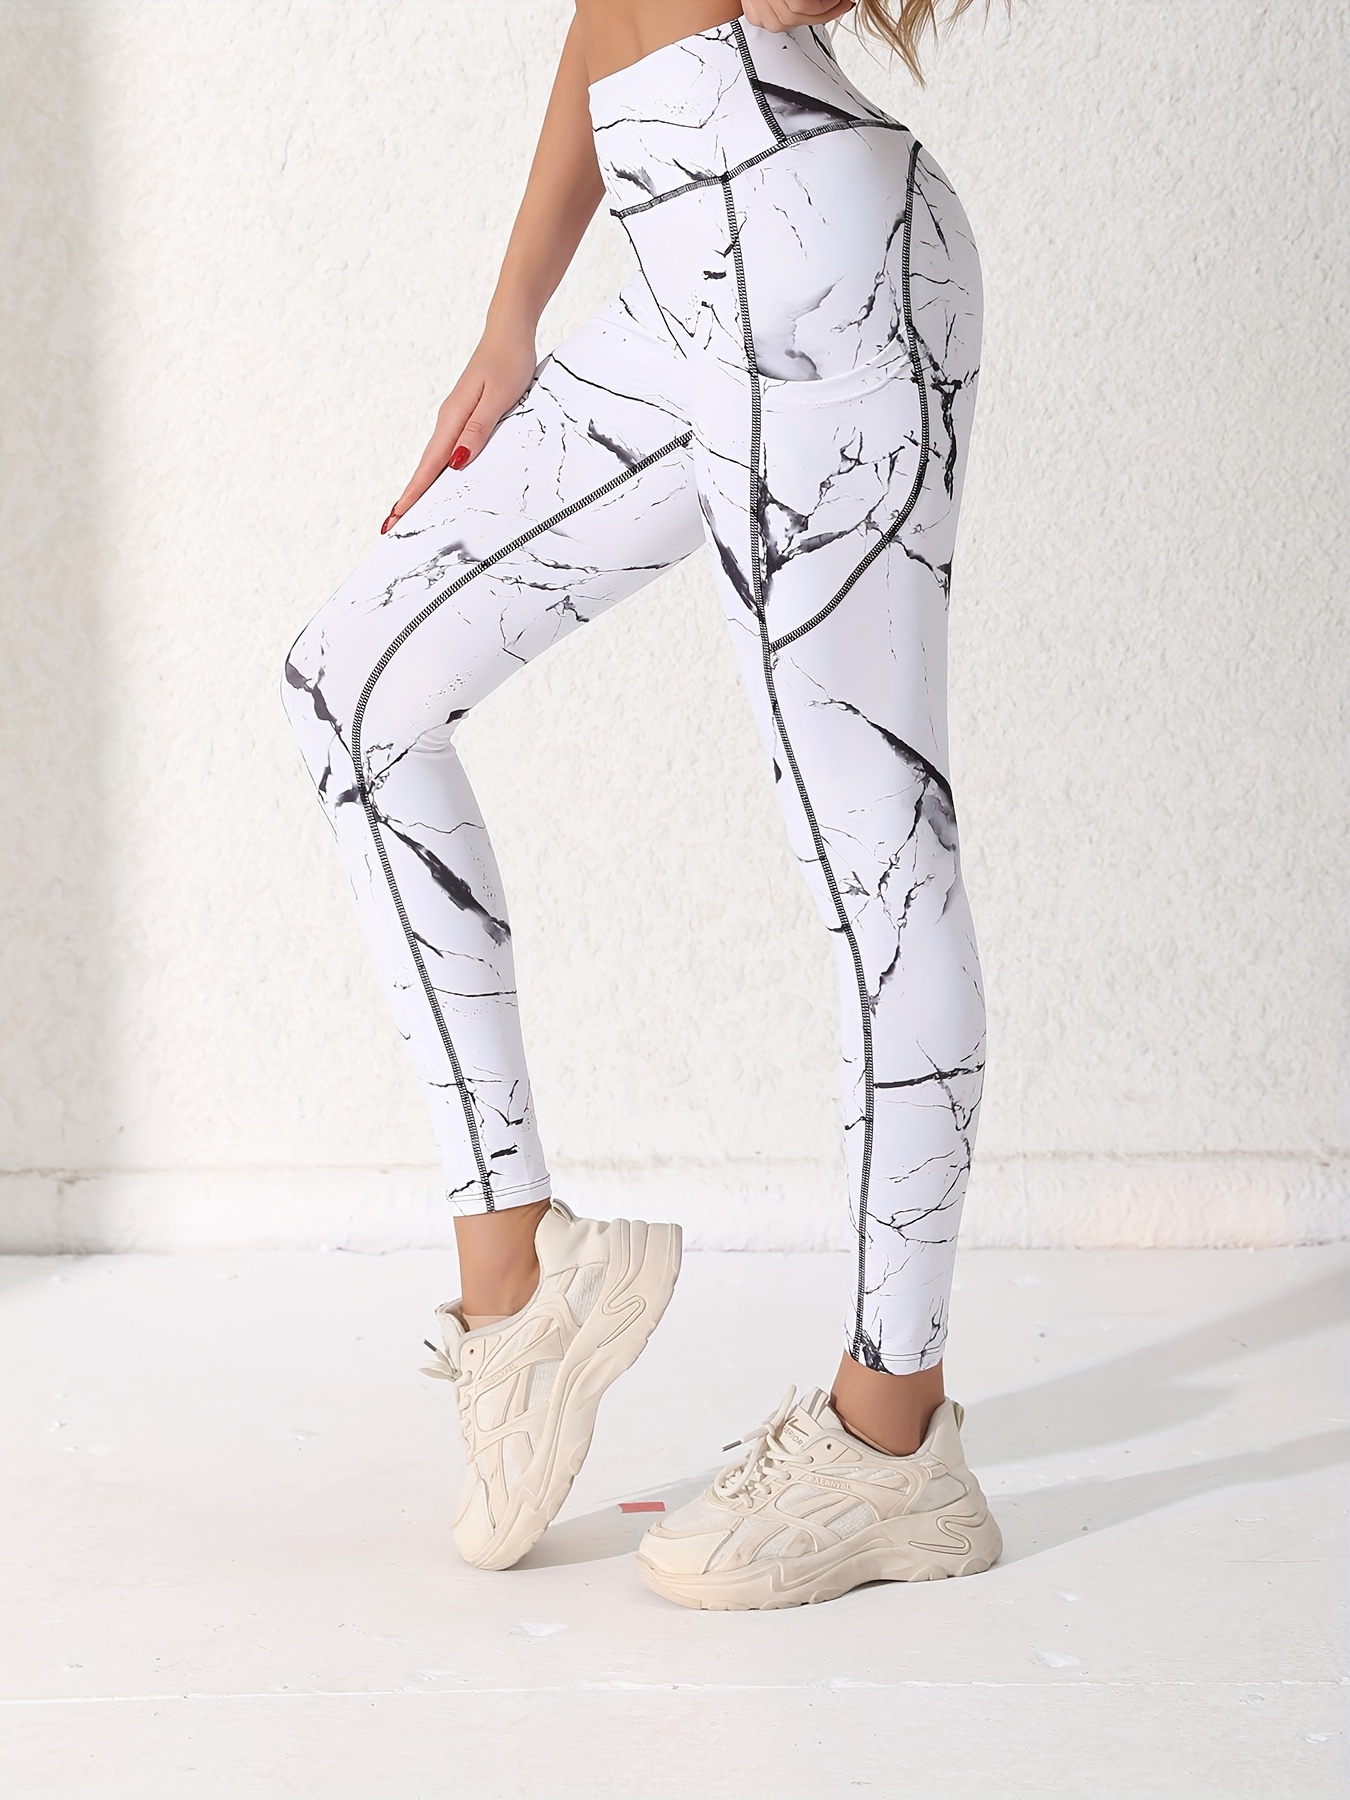 Marble Push up Pants Women Leggings Sports Activewear Gym Clothing Athletic  Apparel Ladies Plus Size Tights White Yoga Pants Hand Drawn Fit 